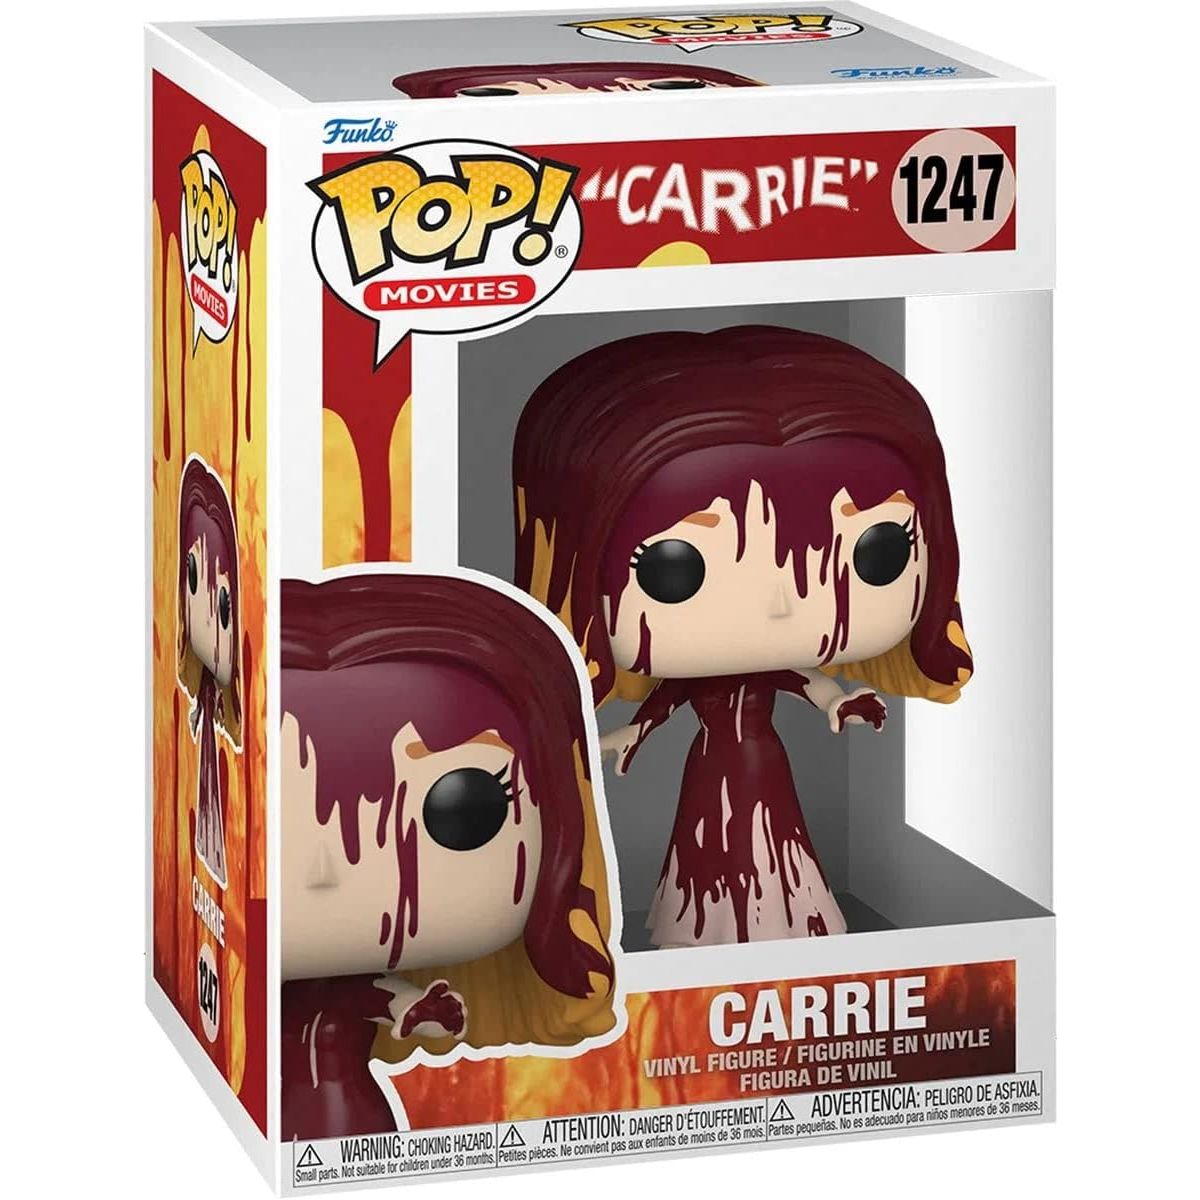 Funko Pop! Movies Carrie 1247 Carrie Funko